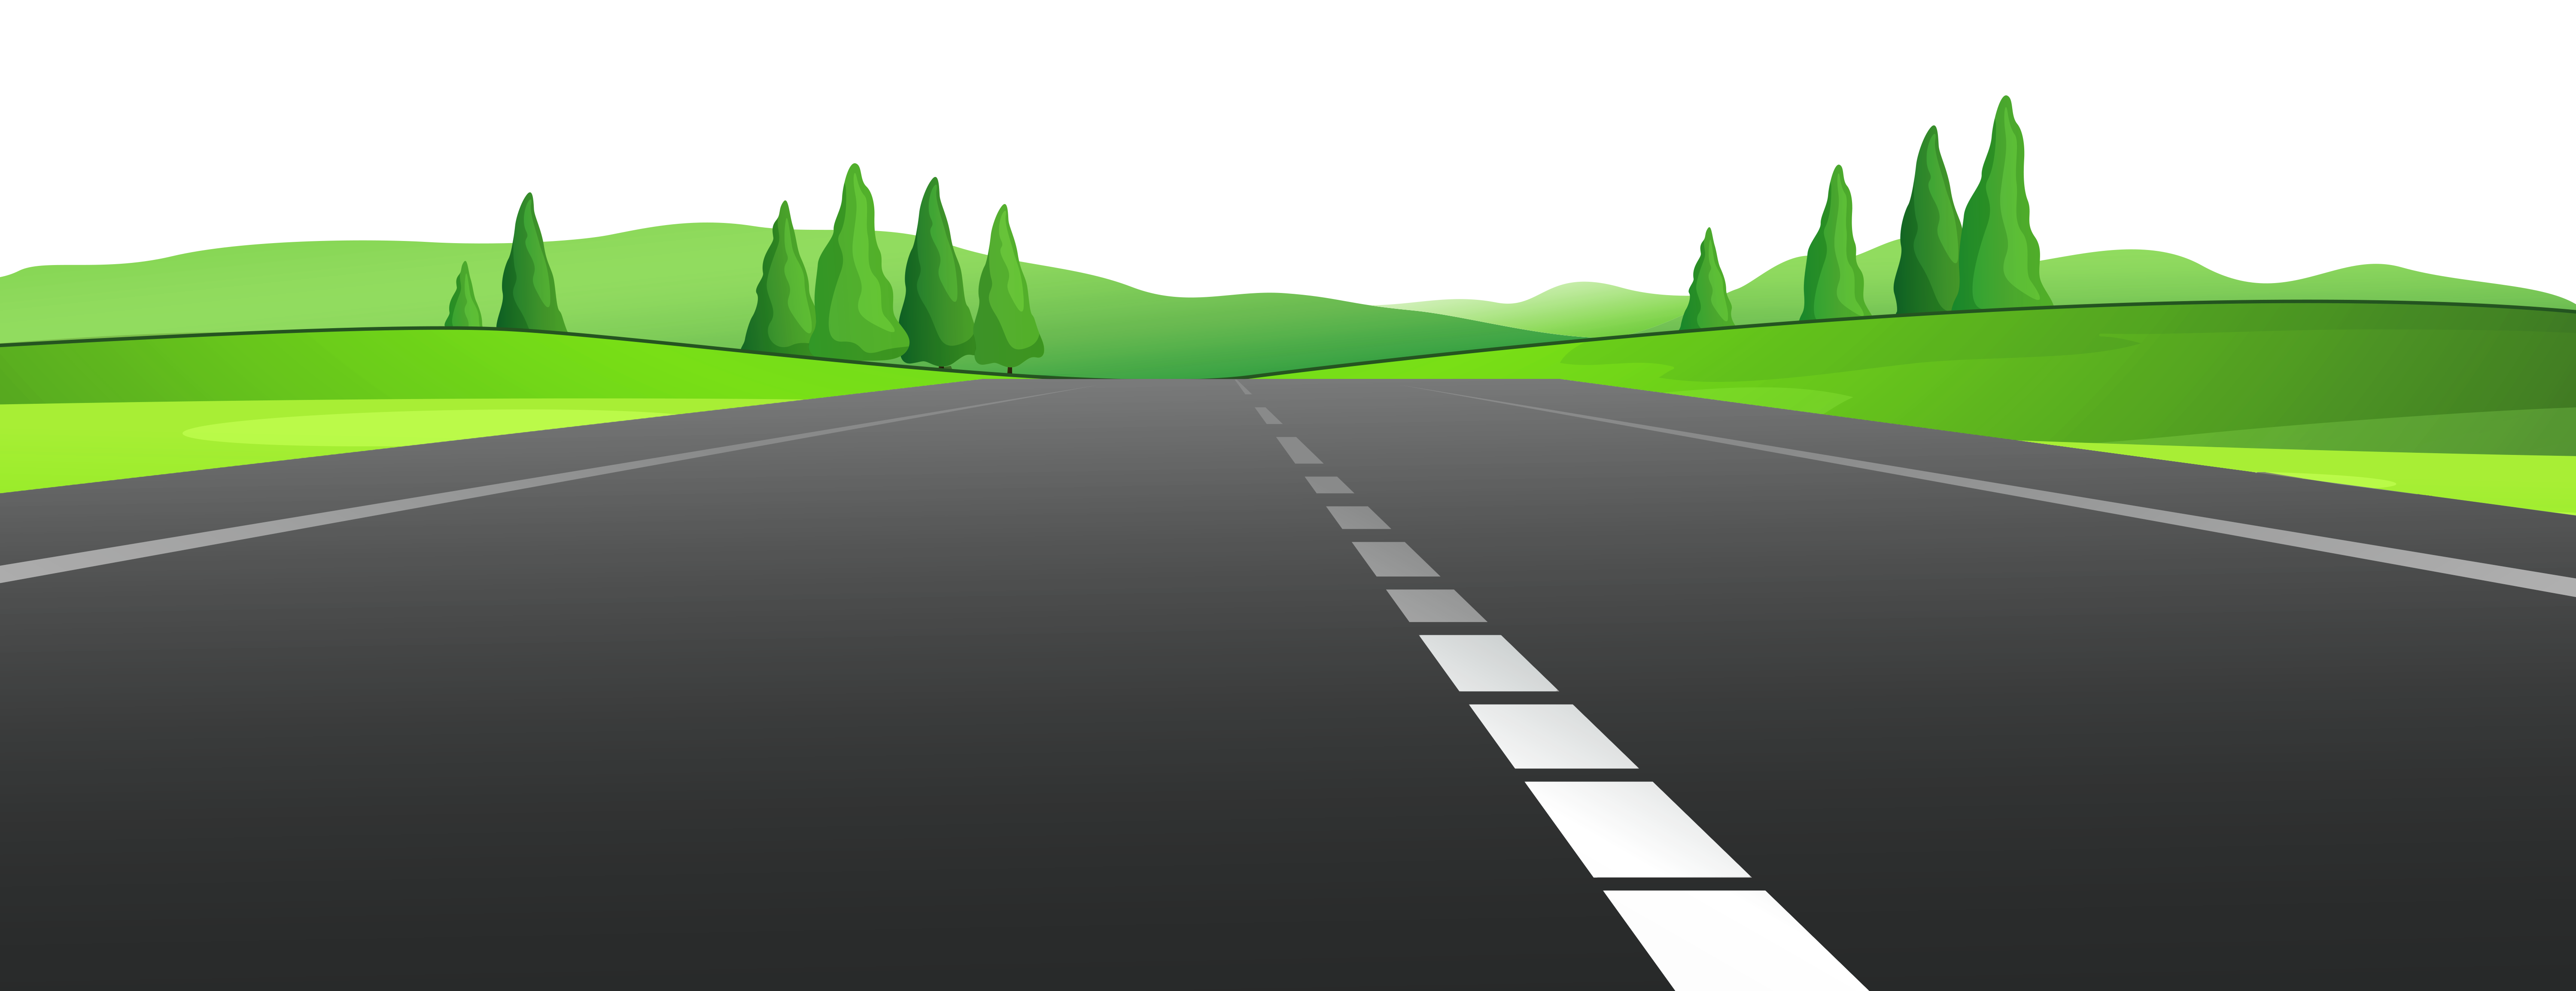 Highway clipart smooth road. With grass png gallery